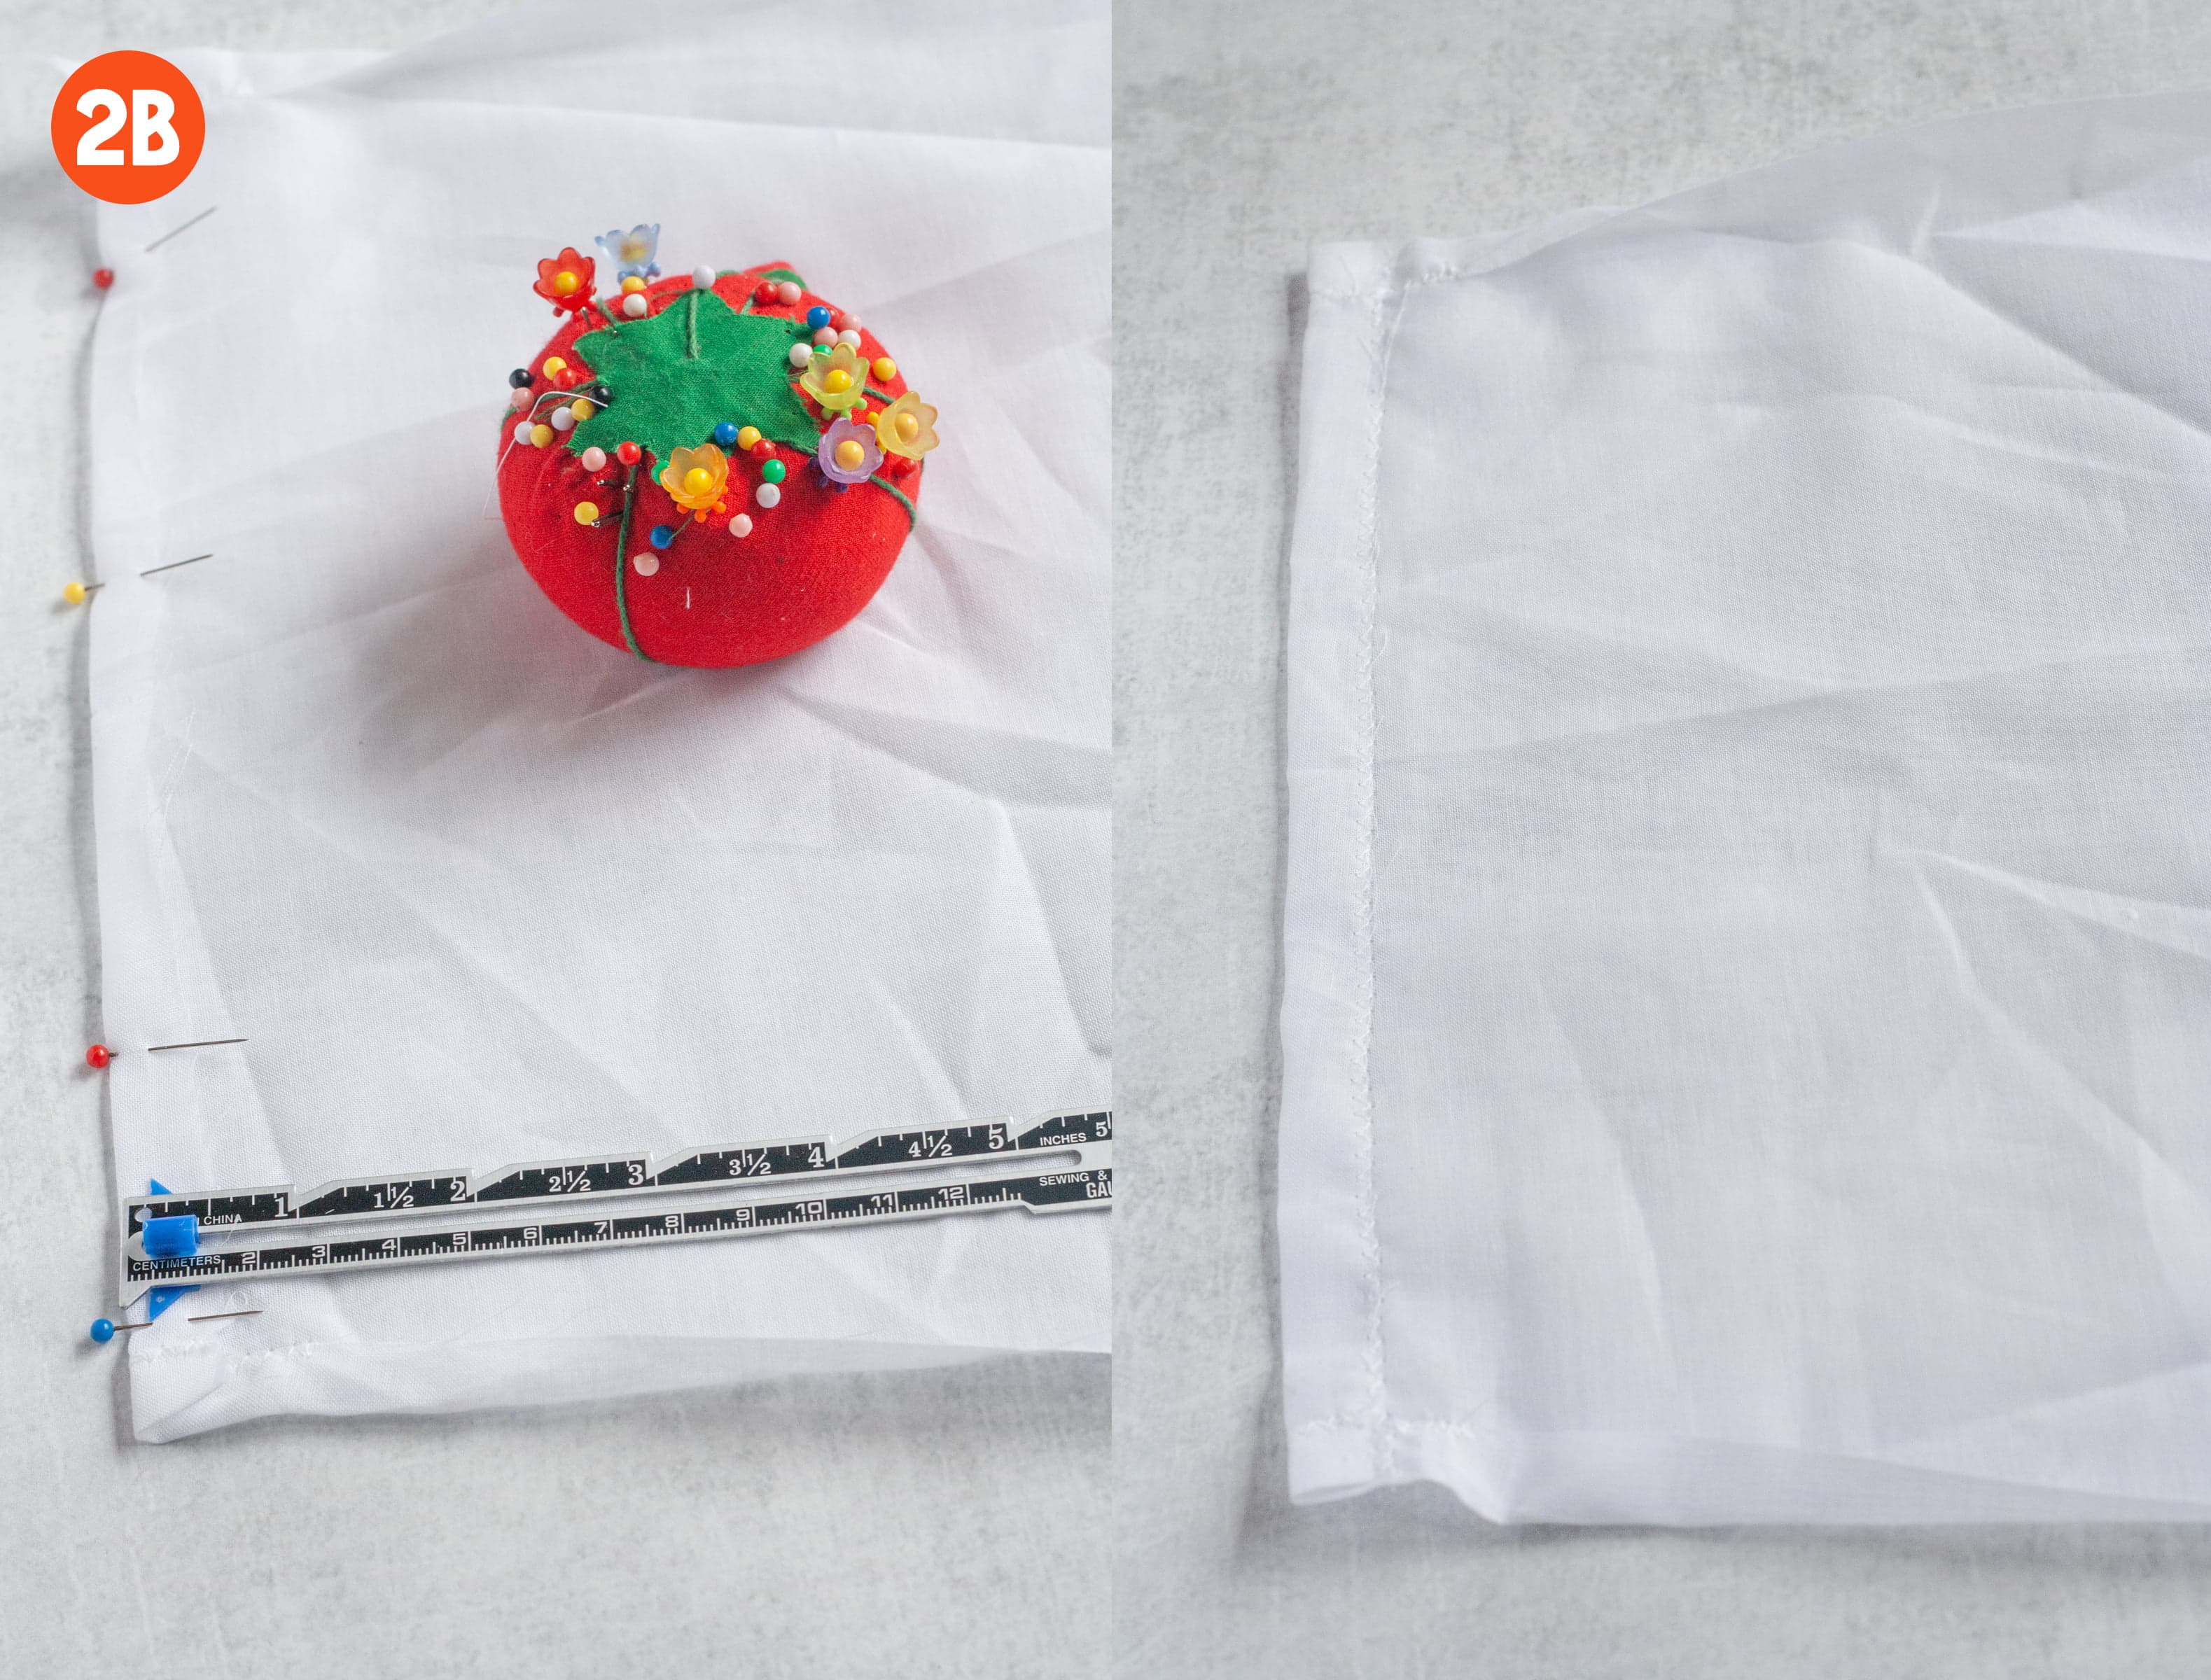 2 side-by-side shots showing how to make a drawstring casing. In one image, an edge of cotton voile is folded over and pinned. In the other, that fold is sewn down. Labeled 2b.